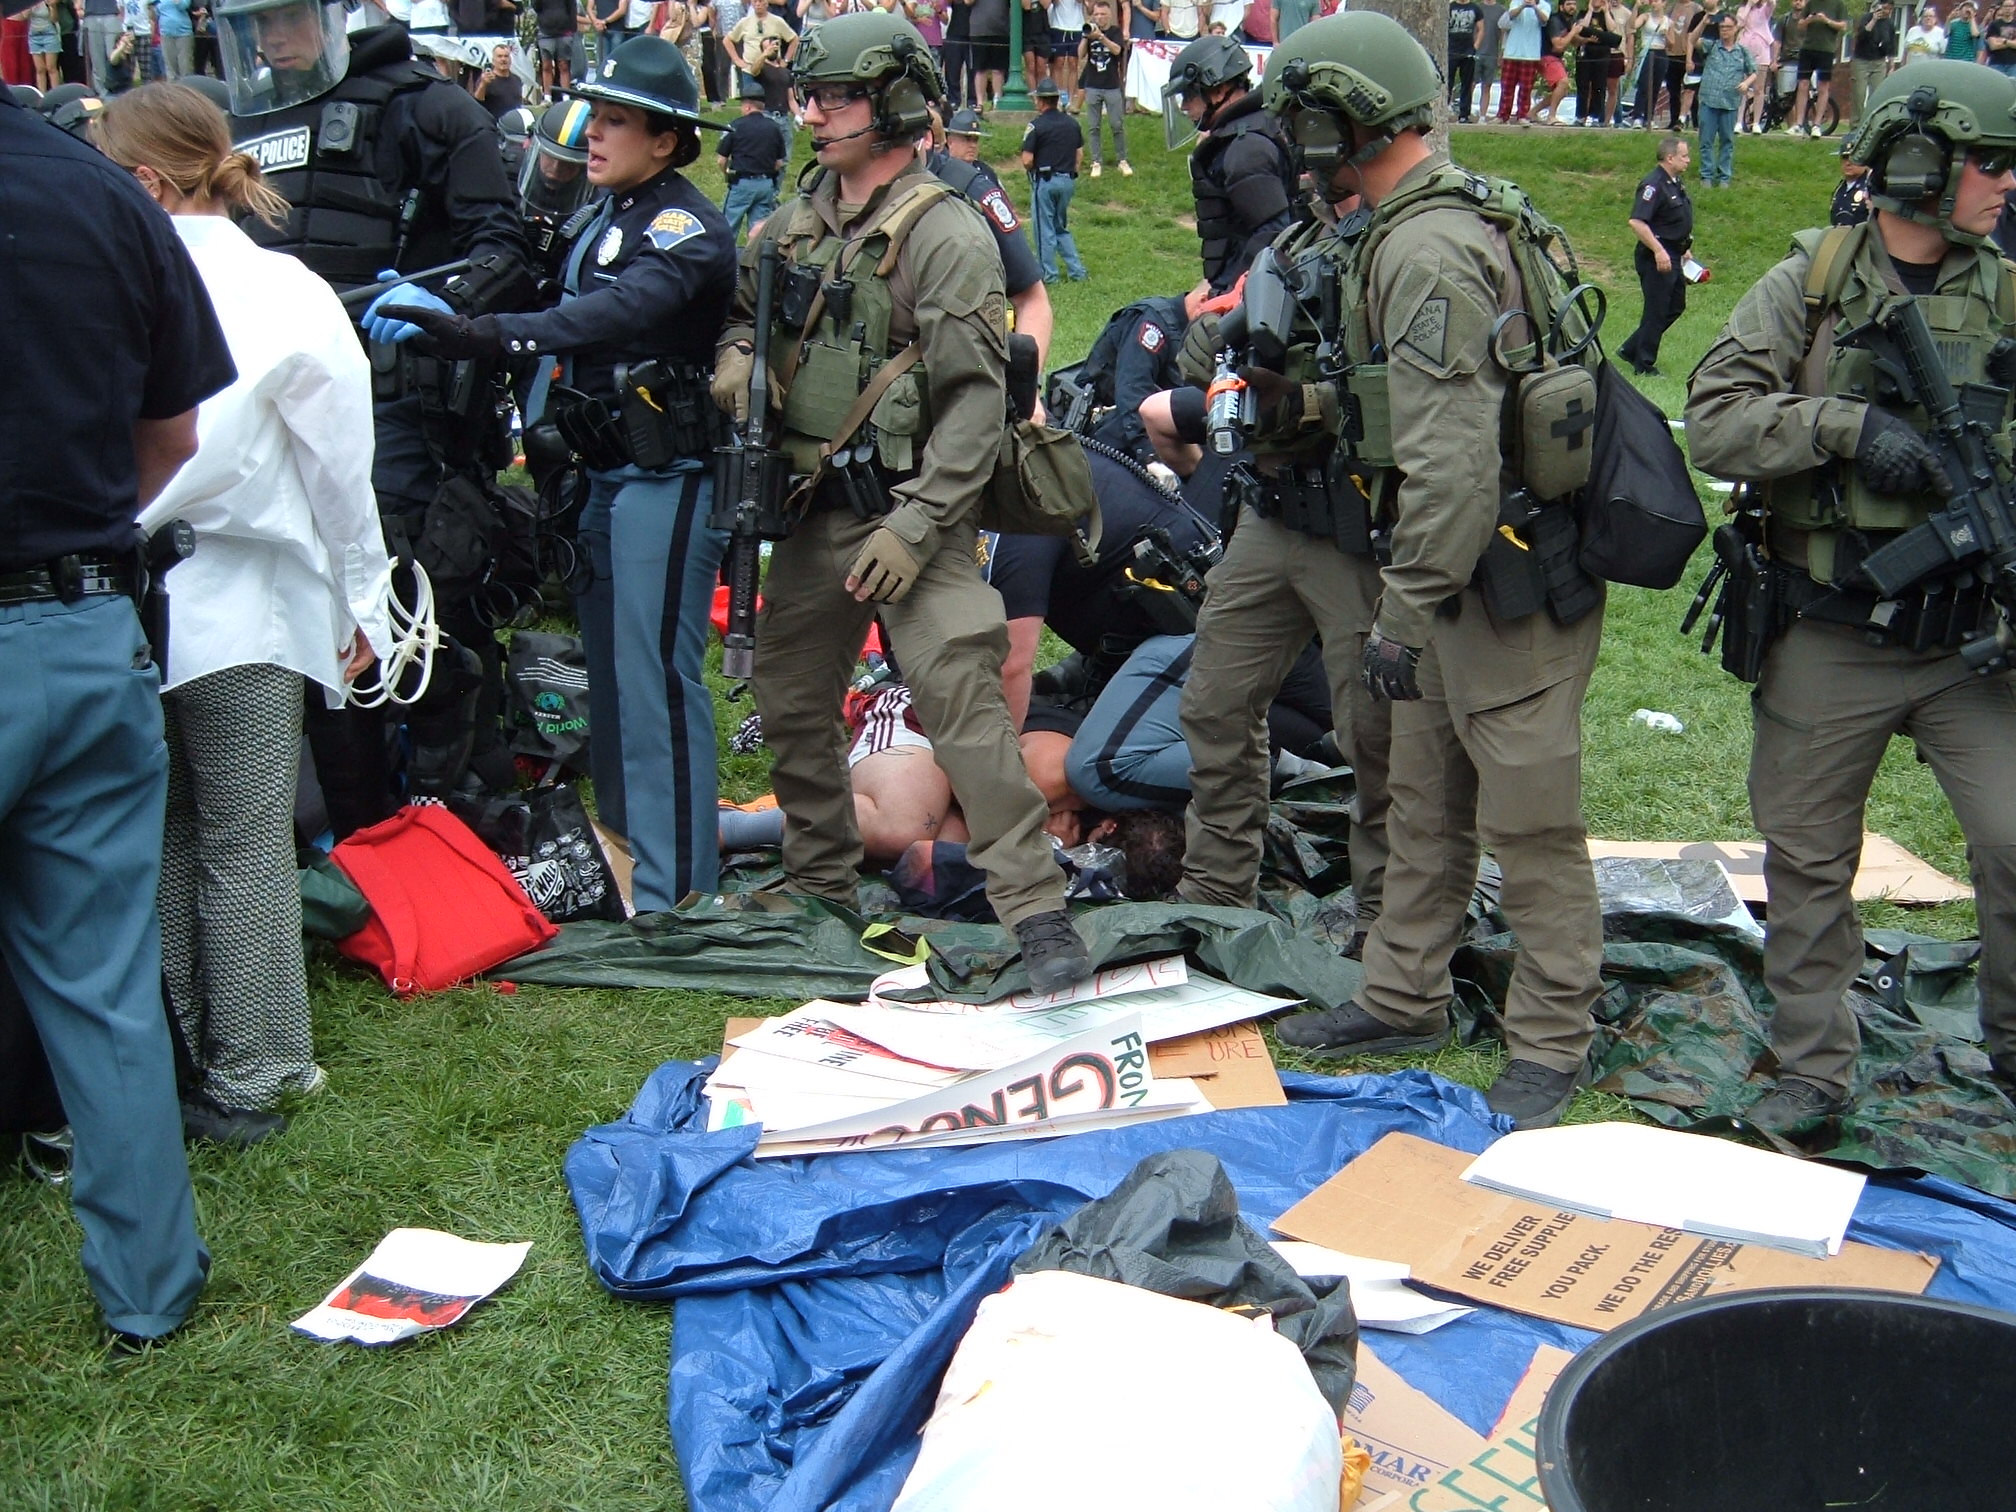 Indiana State Police in riot gear arrest a protestor. One officer kneels on their head and neck as police wrestle the protestor's hands into zip tie handcuffs. The destroyed tent and signs litter the area.